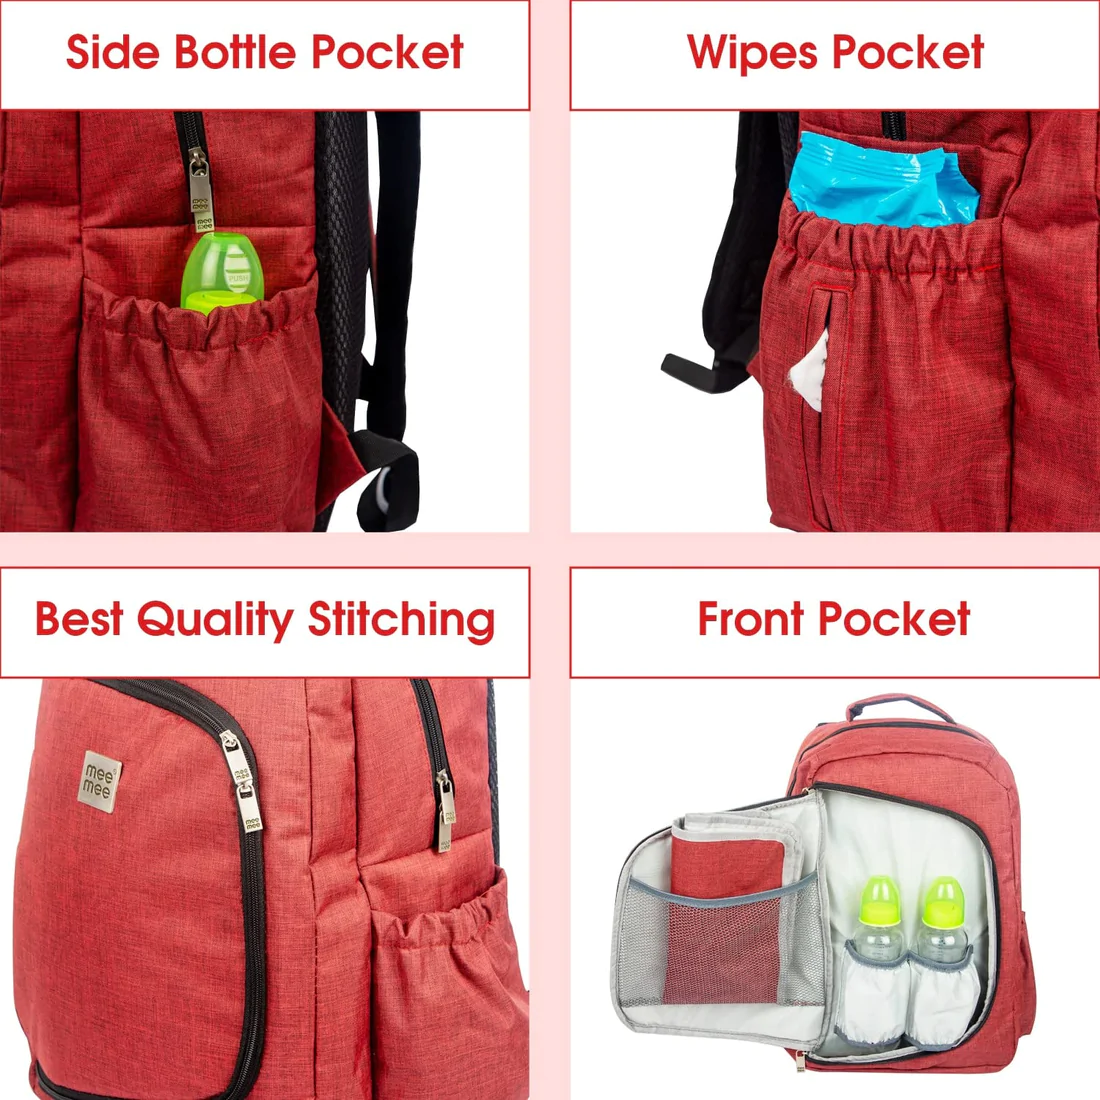 Mee Mee Multifunctional Diaper Bag with Multiple Pockets (Pink) - Online  Shopping site in Nepal ecommerce - Buy Groceries, Electronics, Phones,  Laptop, Books at best price in Nepal | Order Now Nepal